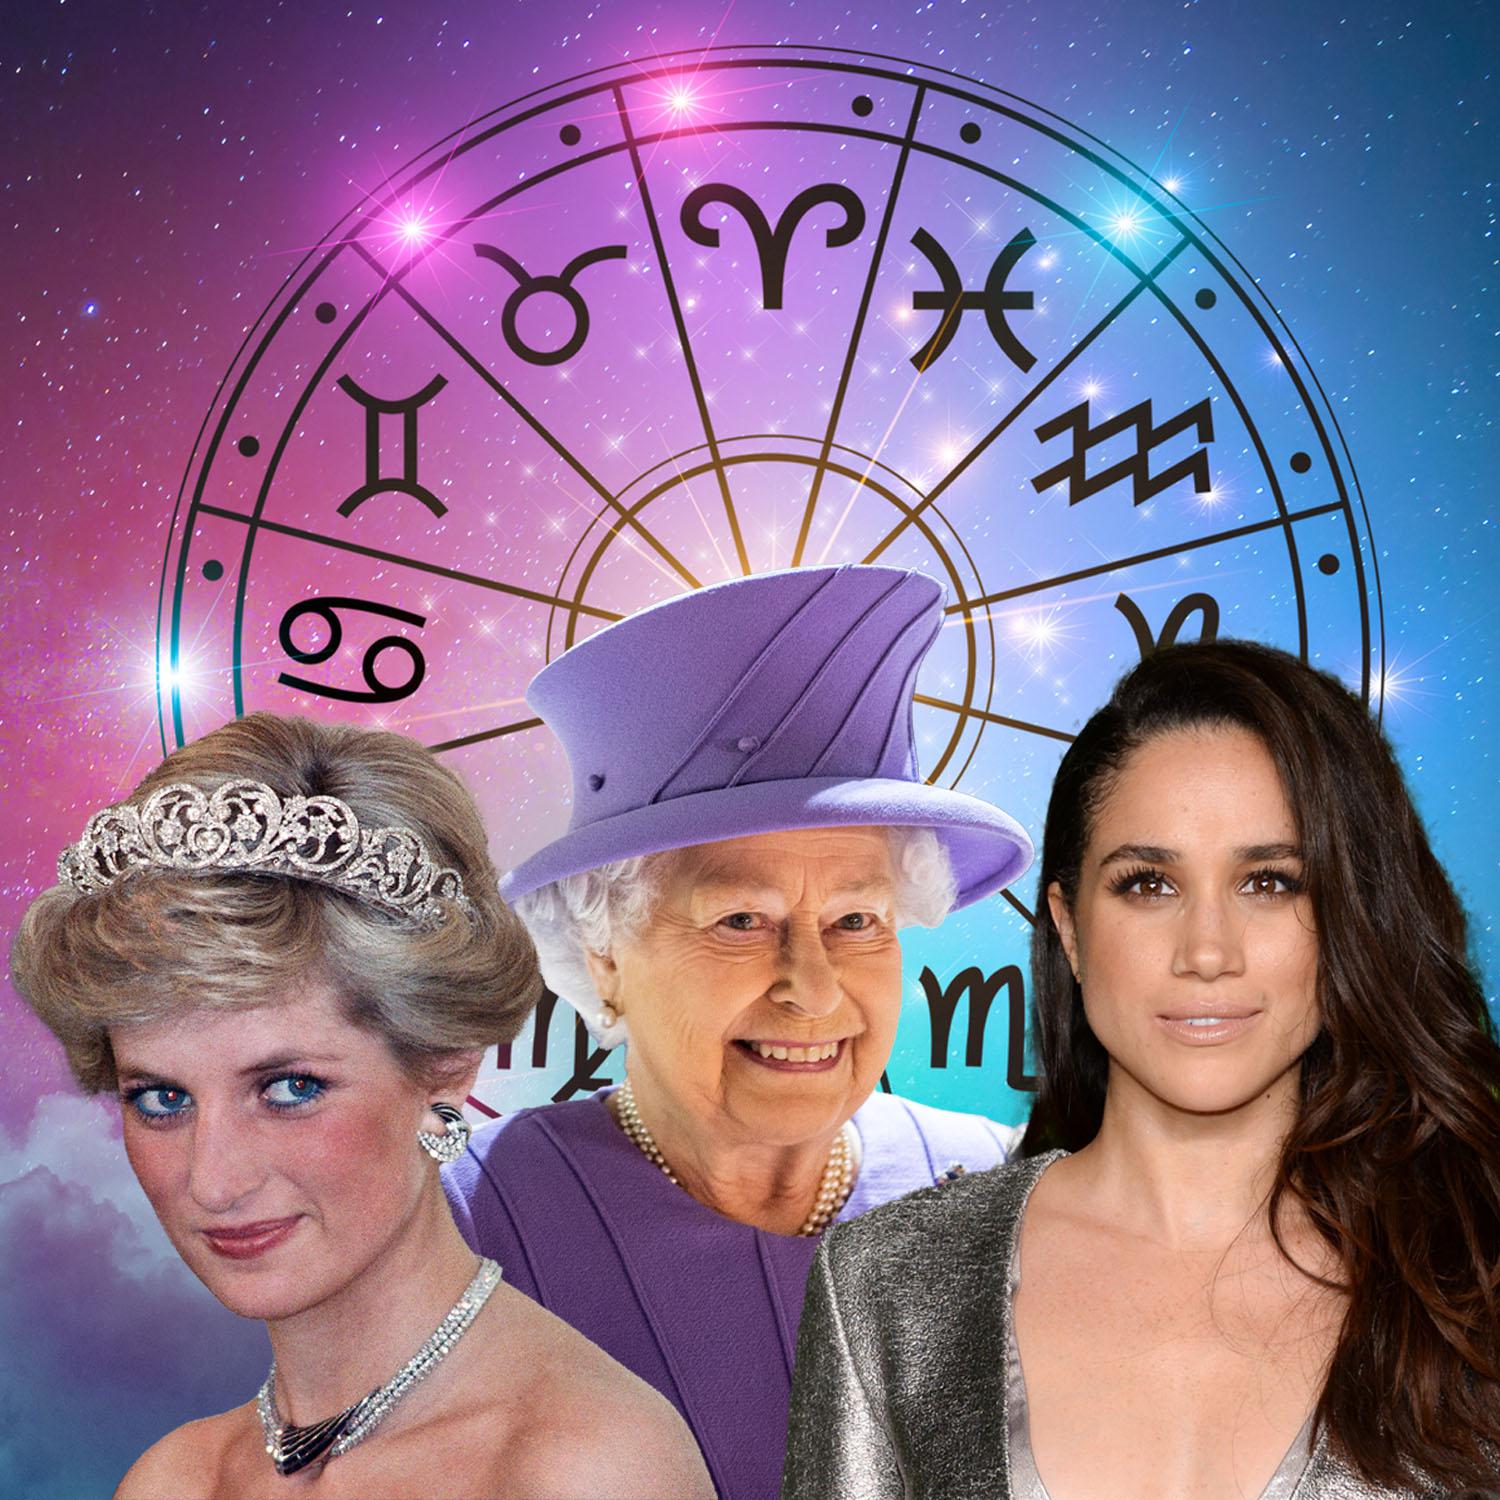 Which Royal Family Member Are You, According to Your Horoscope?